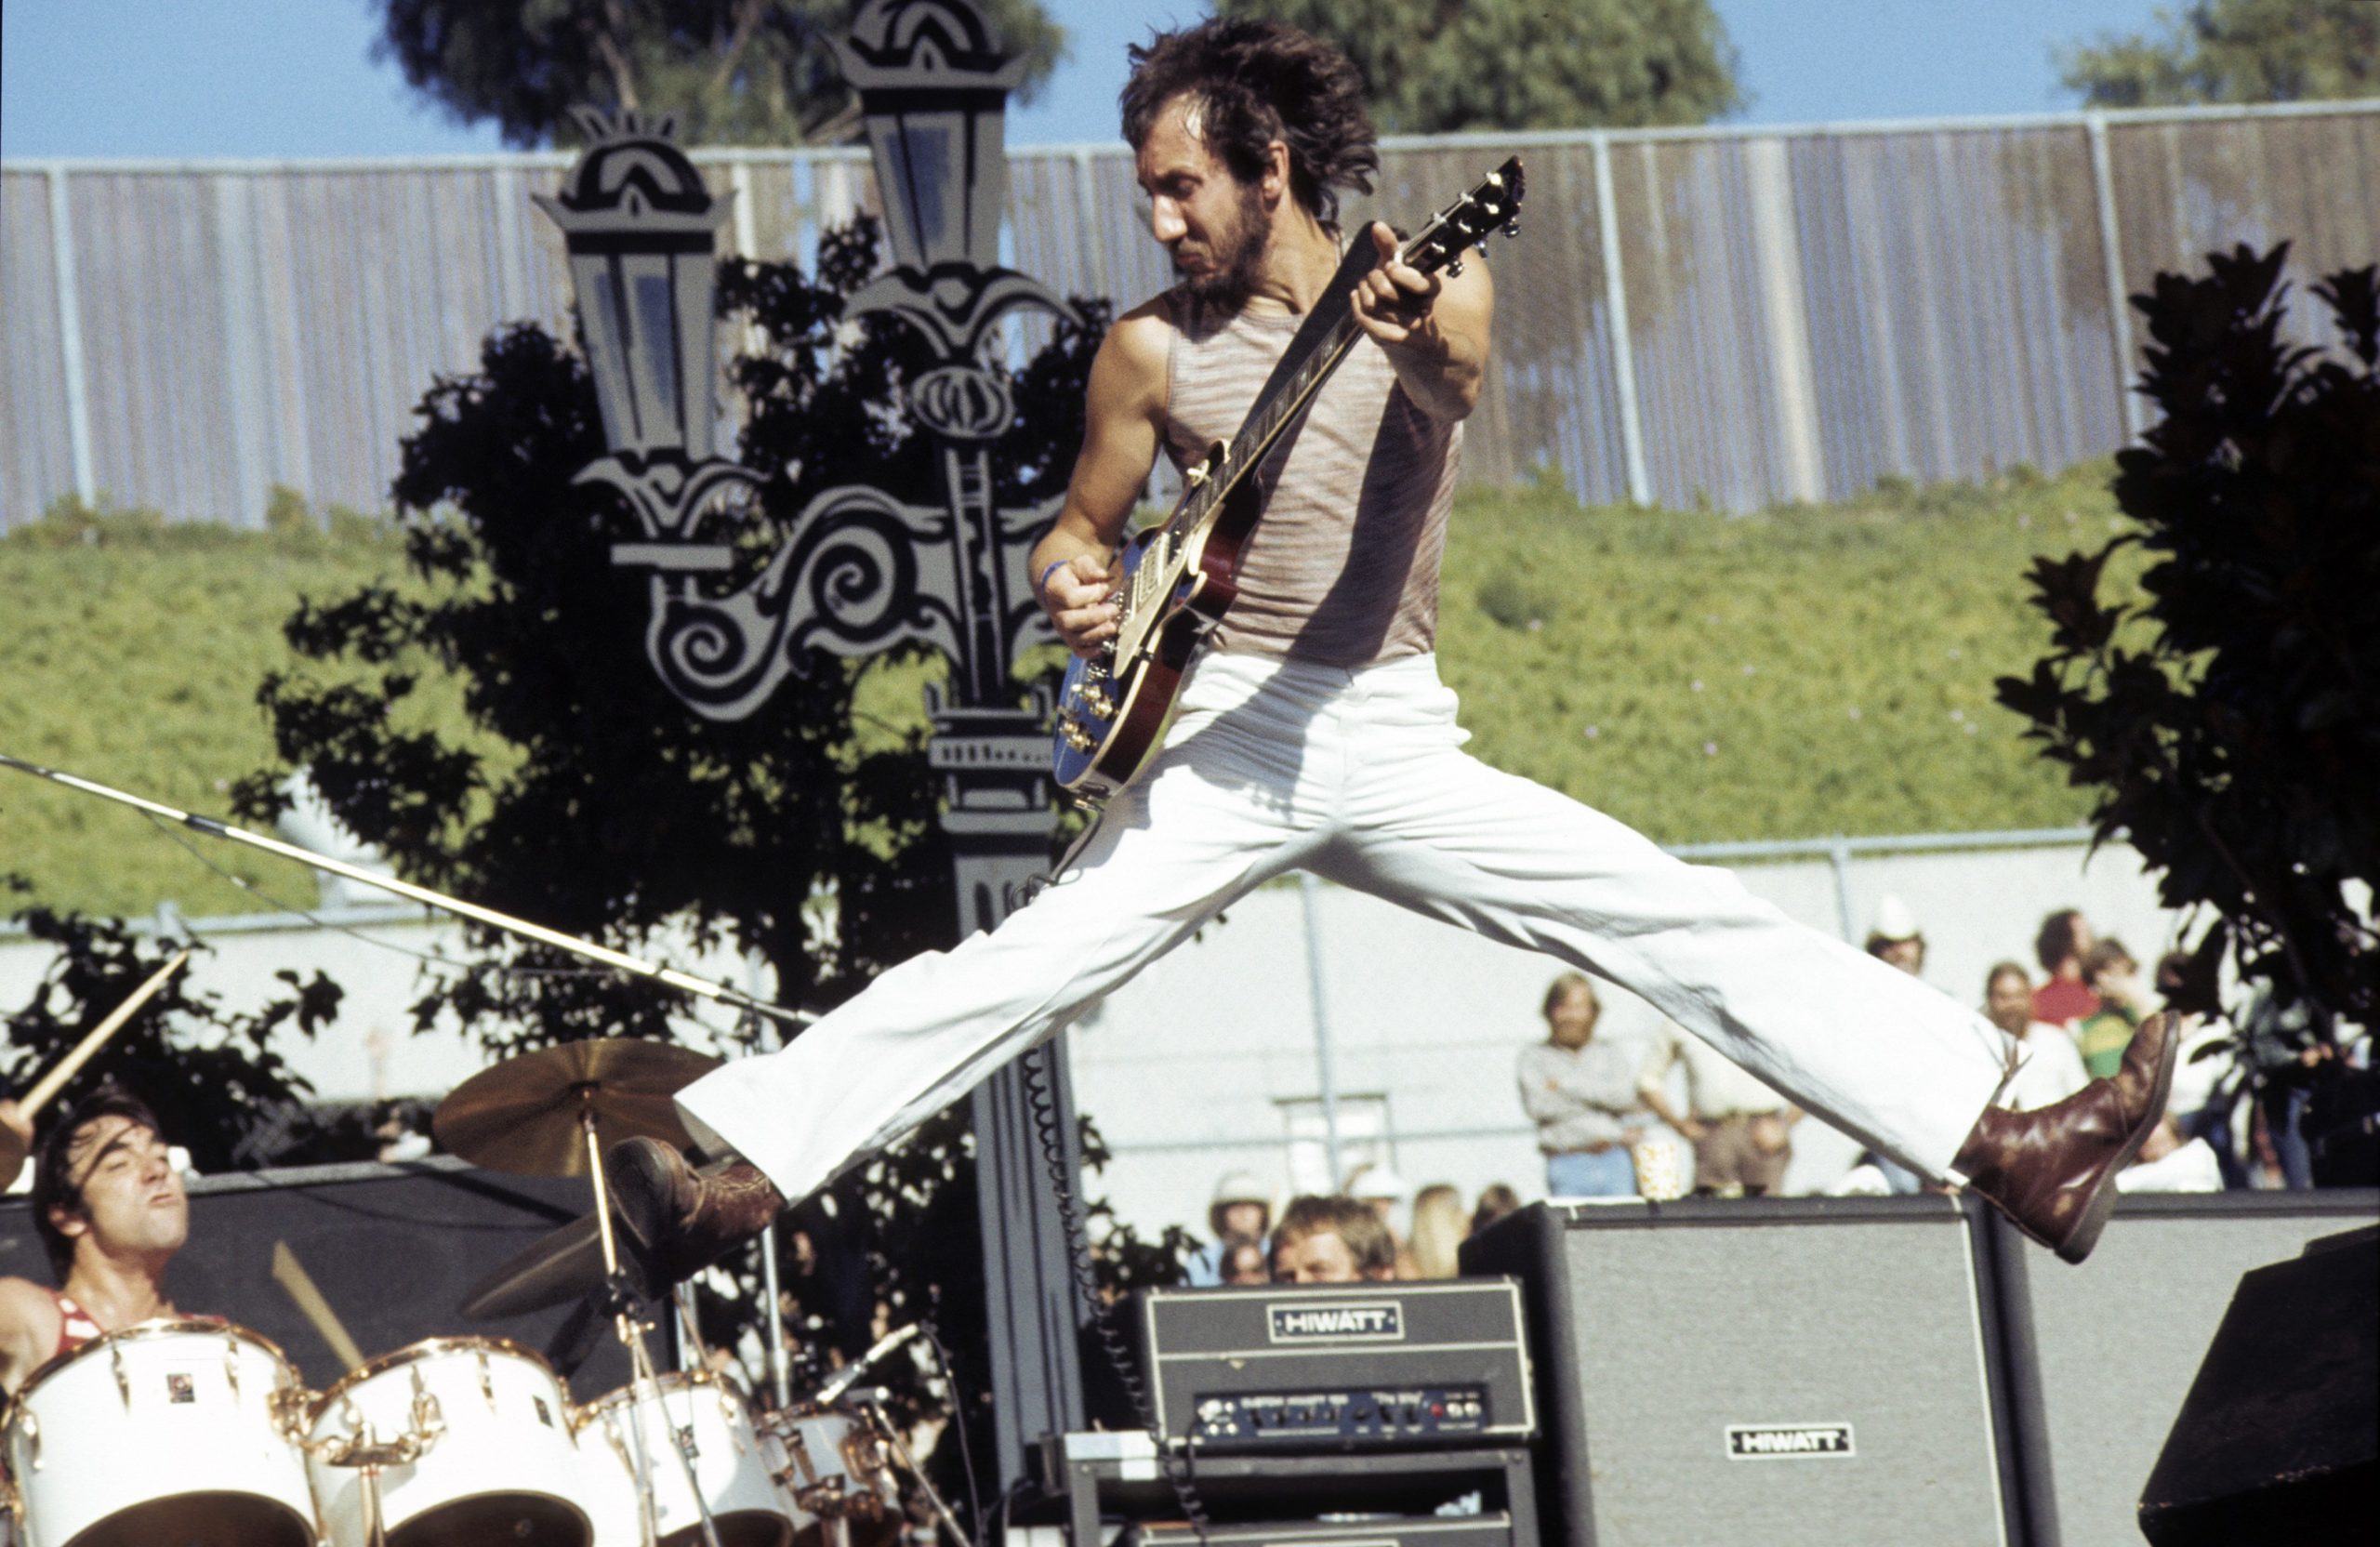 Pete Townshend from the band The Who